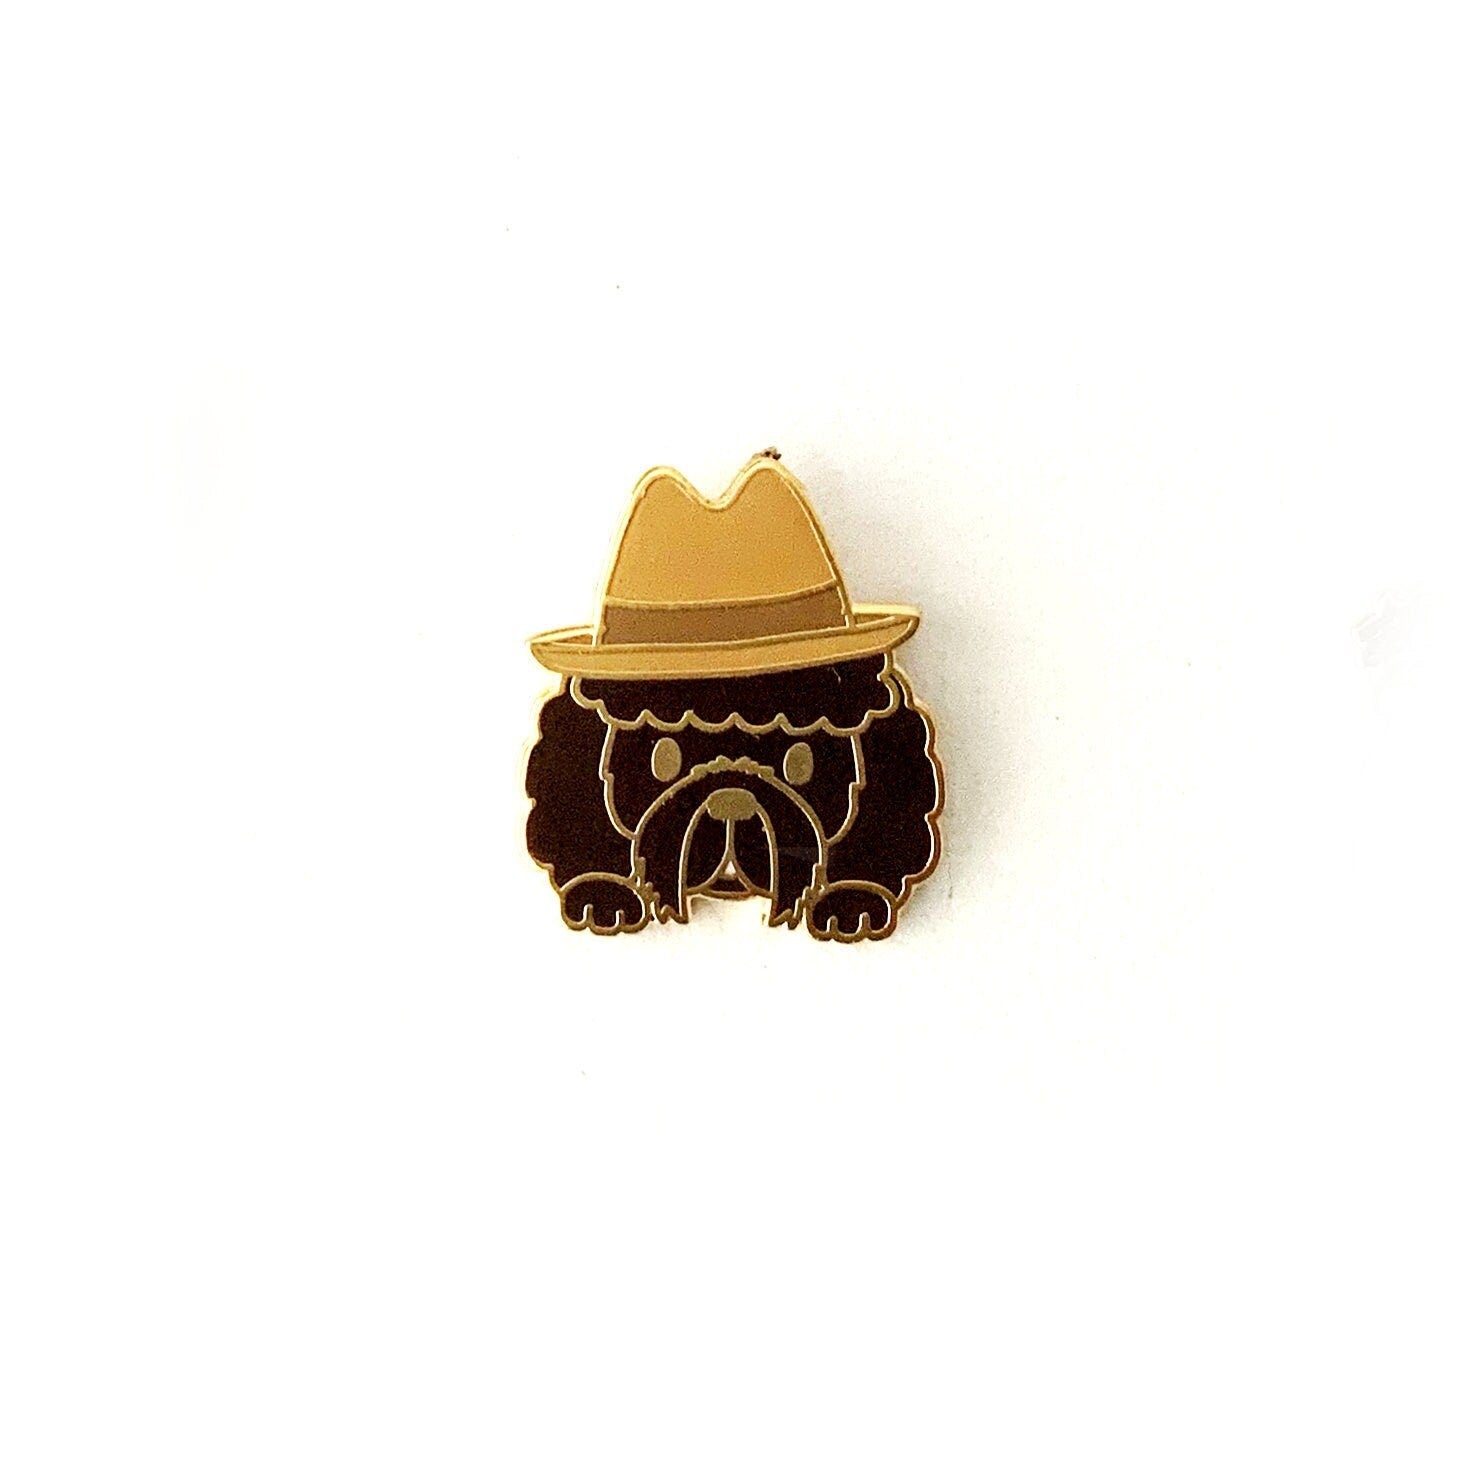 Poodle with Hat - Small Enamel Pin, Pins, Brooches & Lapel Pins